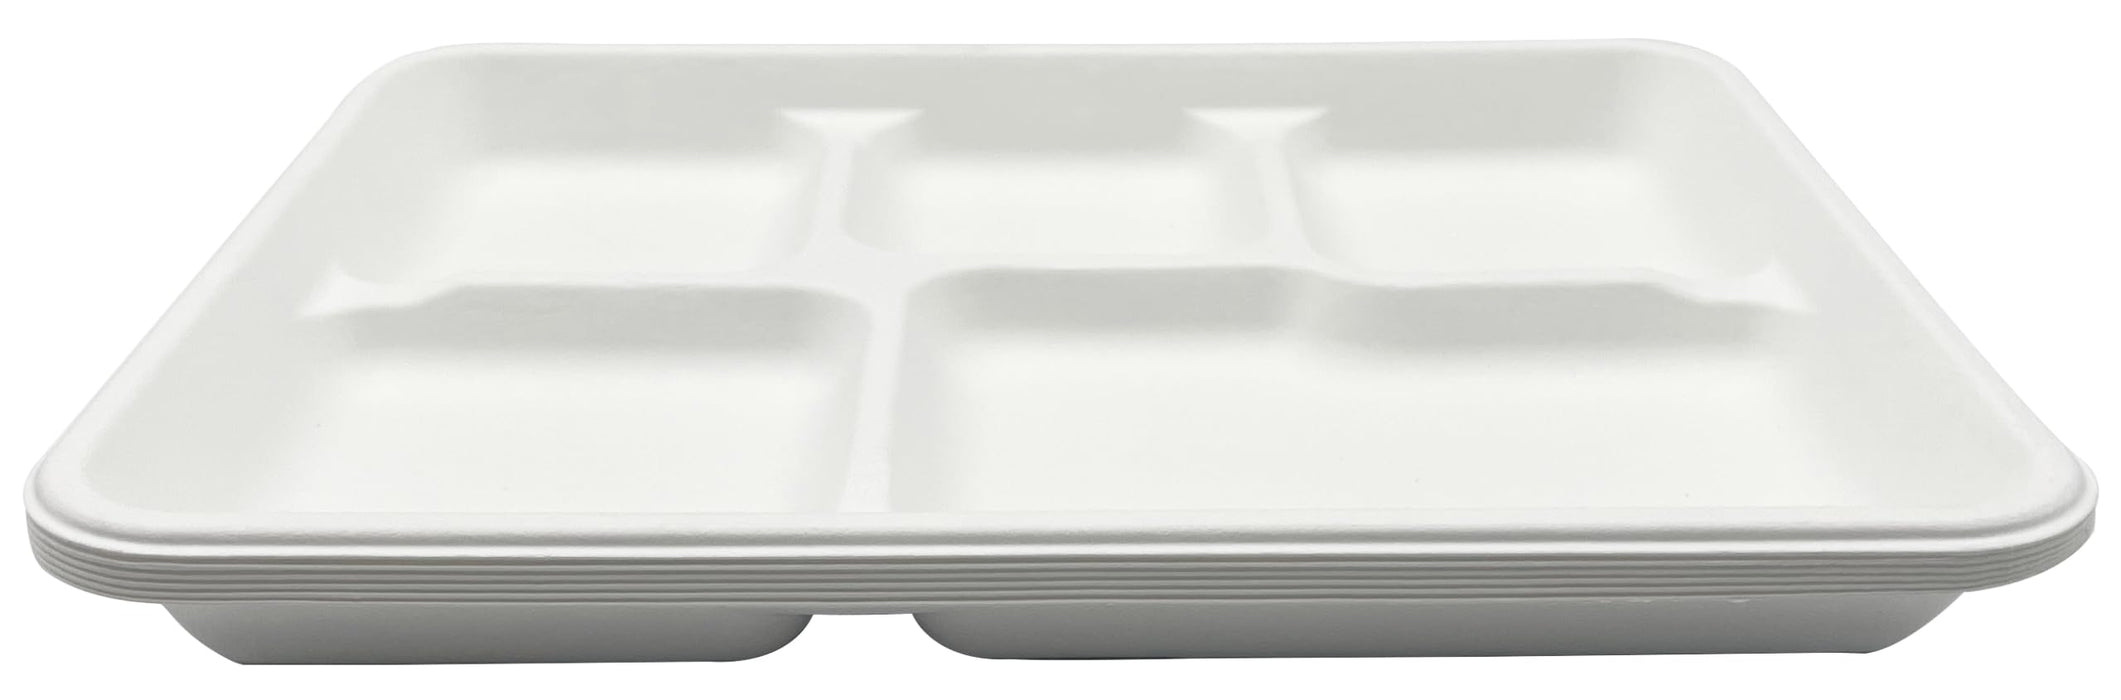 Rani 5 Compartment Square Biodegradable Divided Plates, Pack of 1000 ~ Party, Thali, Buffet | Disposable & Eco-Friendly | Heavy-Duty Sturdy Paper Bagasse | Premium Quality | 10.24" x 8.27" x 0.91"